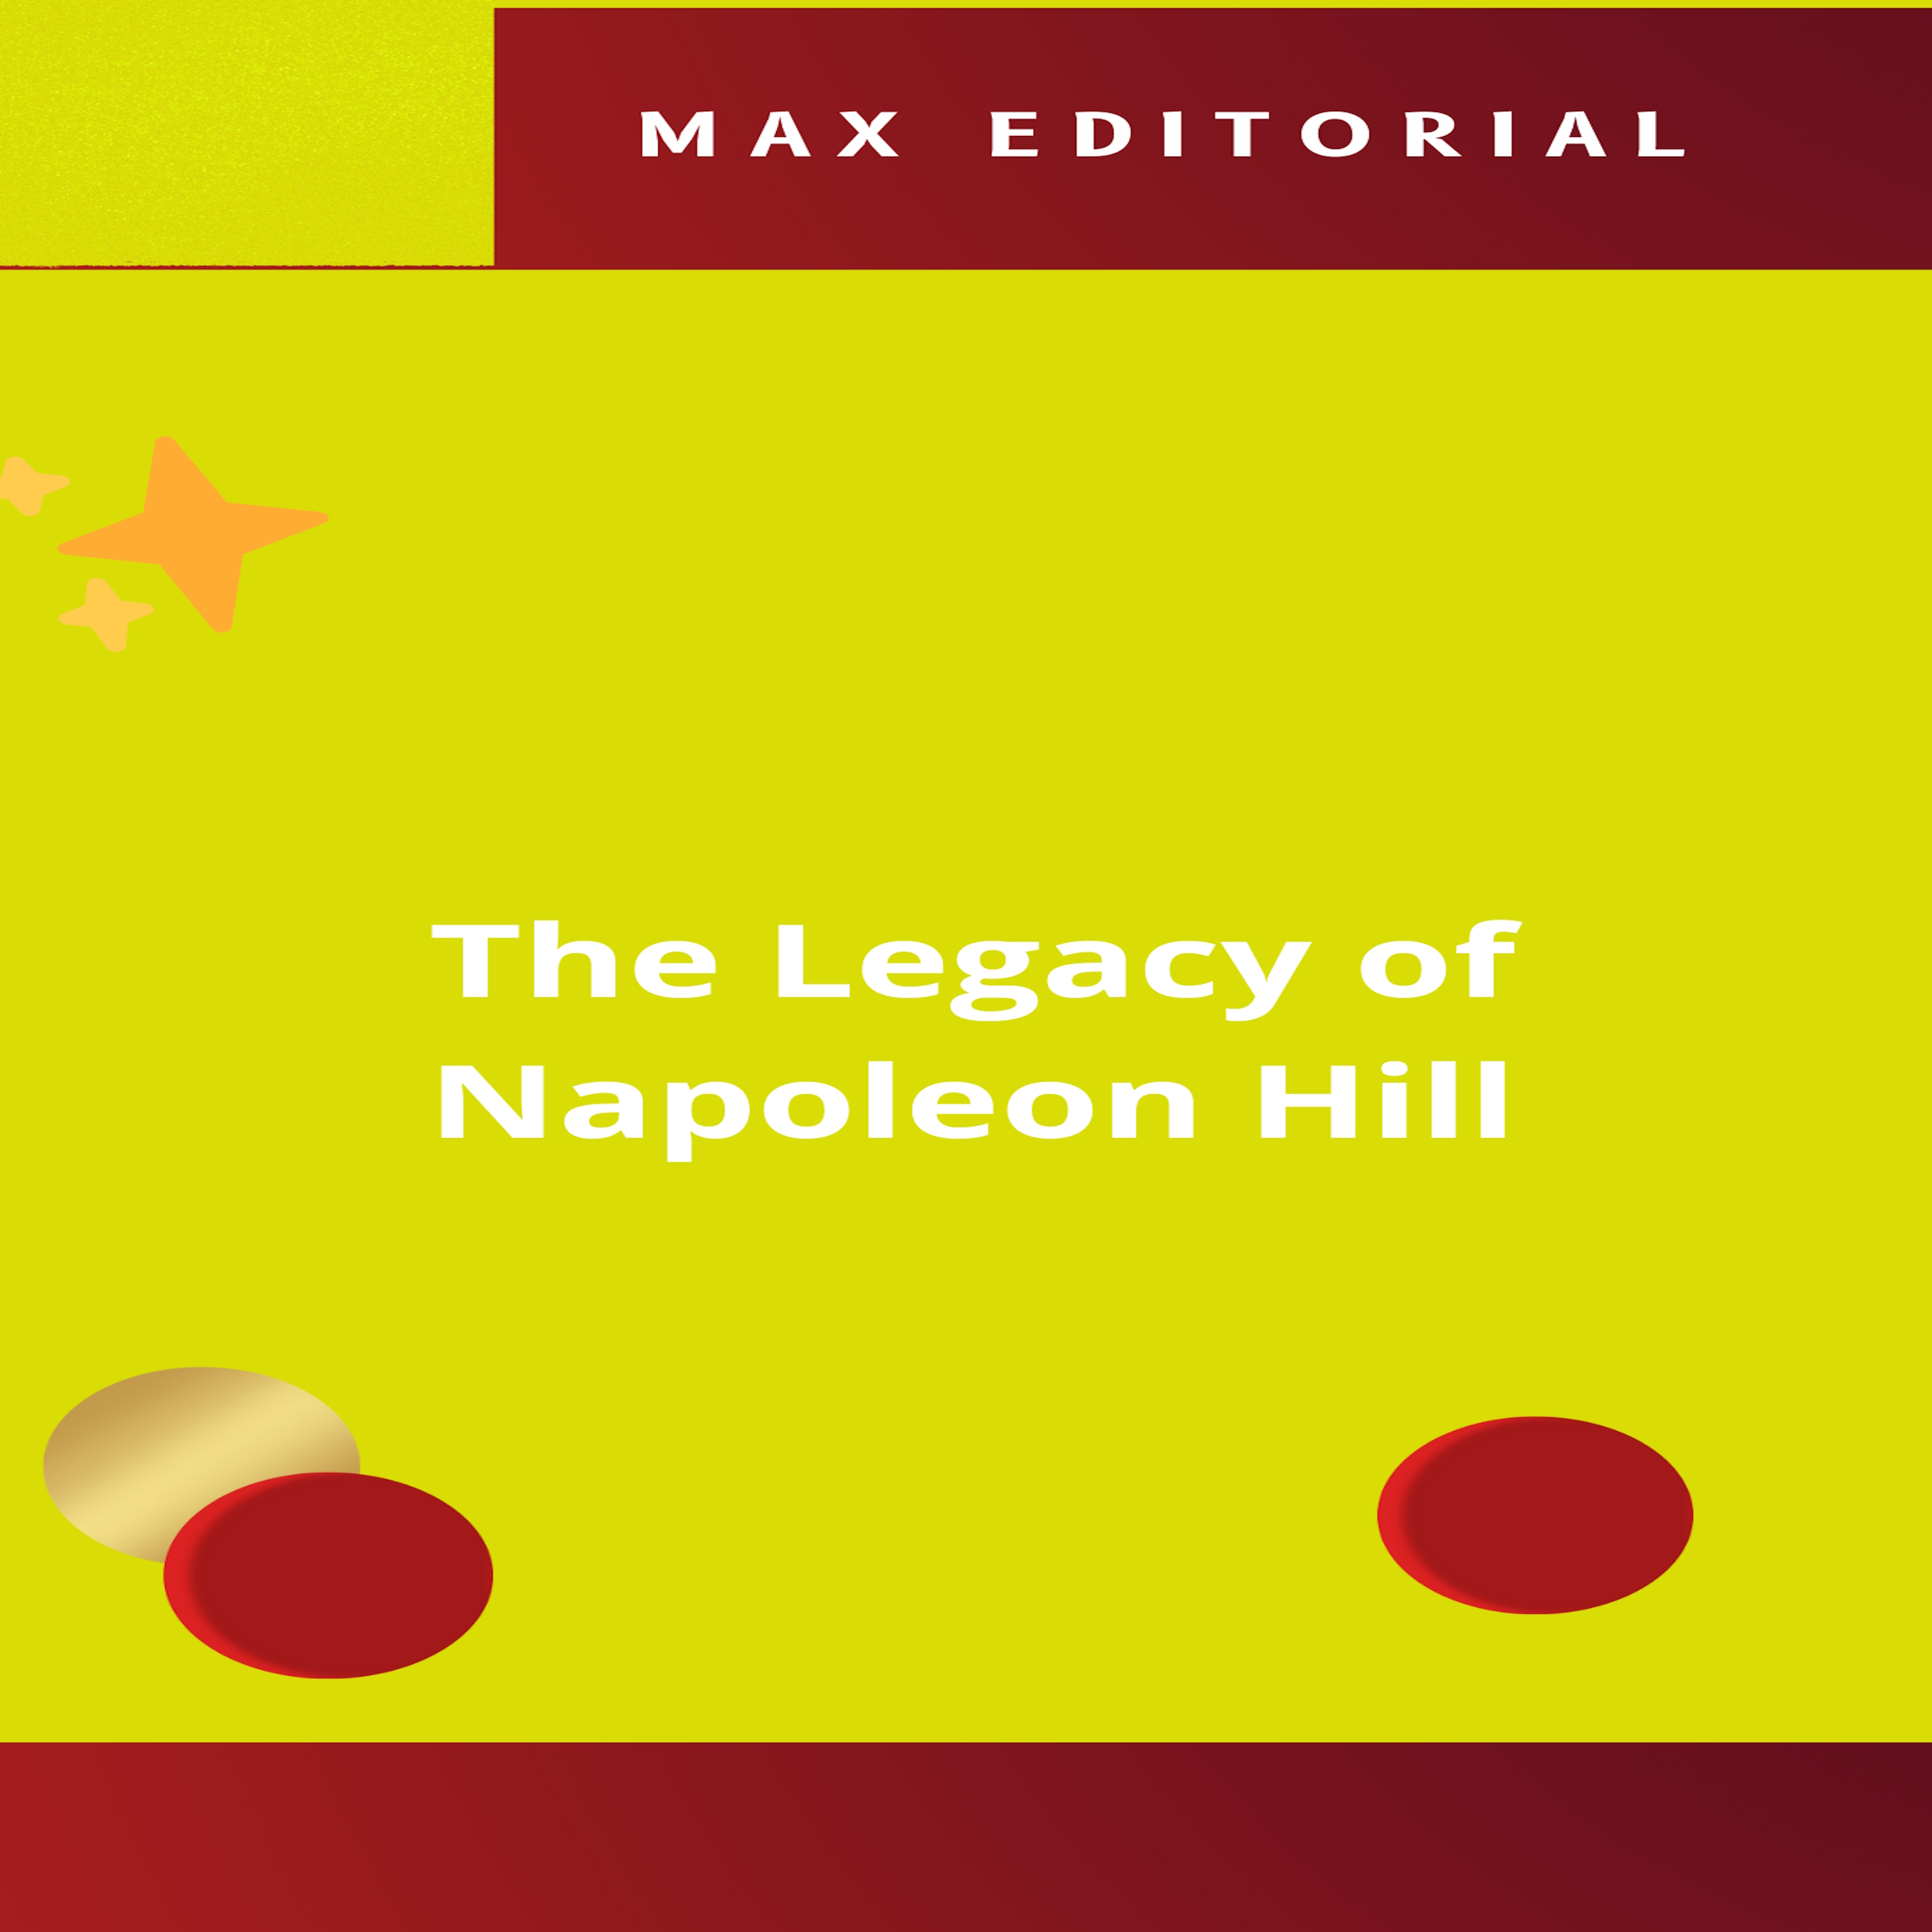 The Legacy of Napoleon Hill